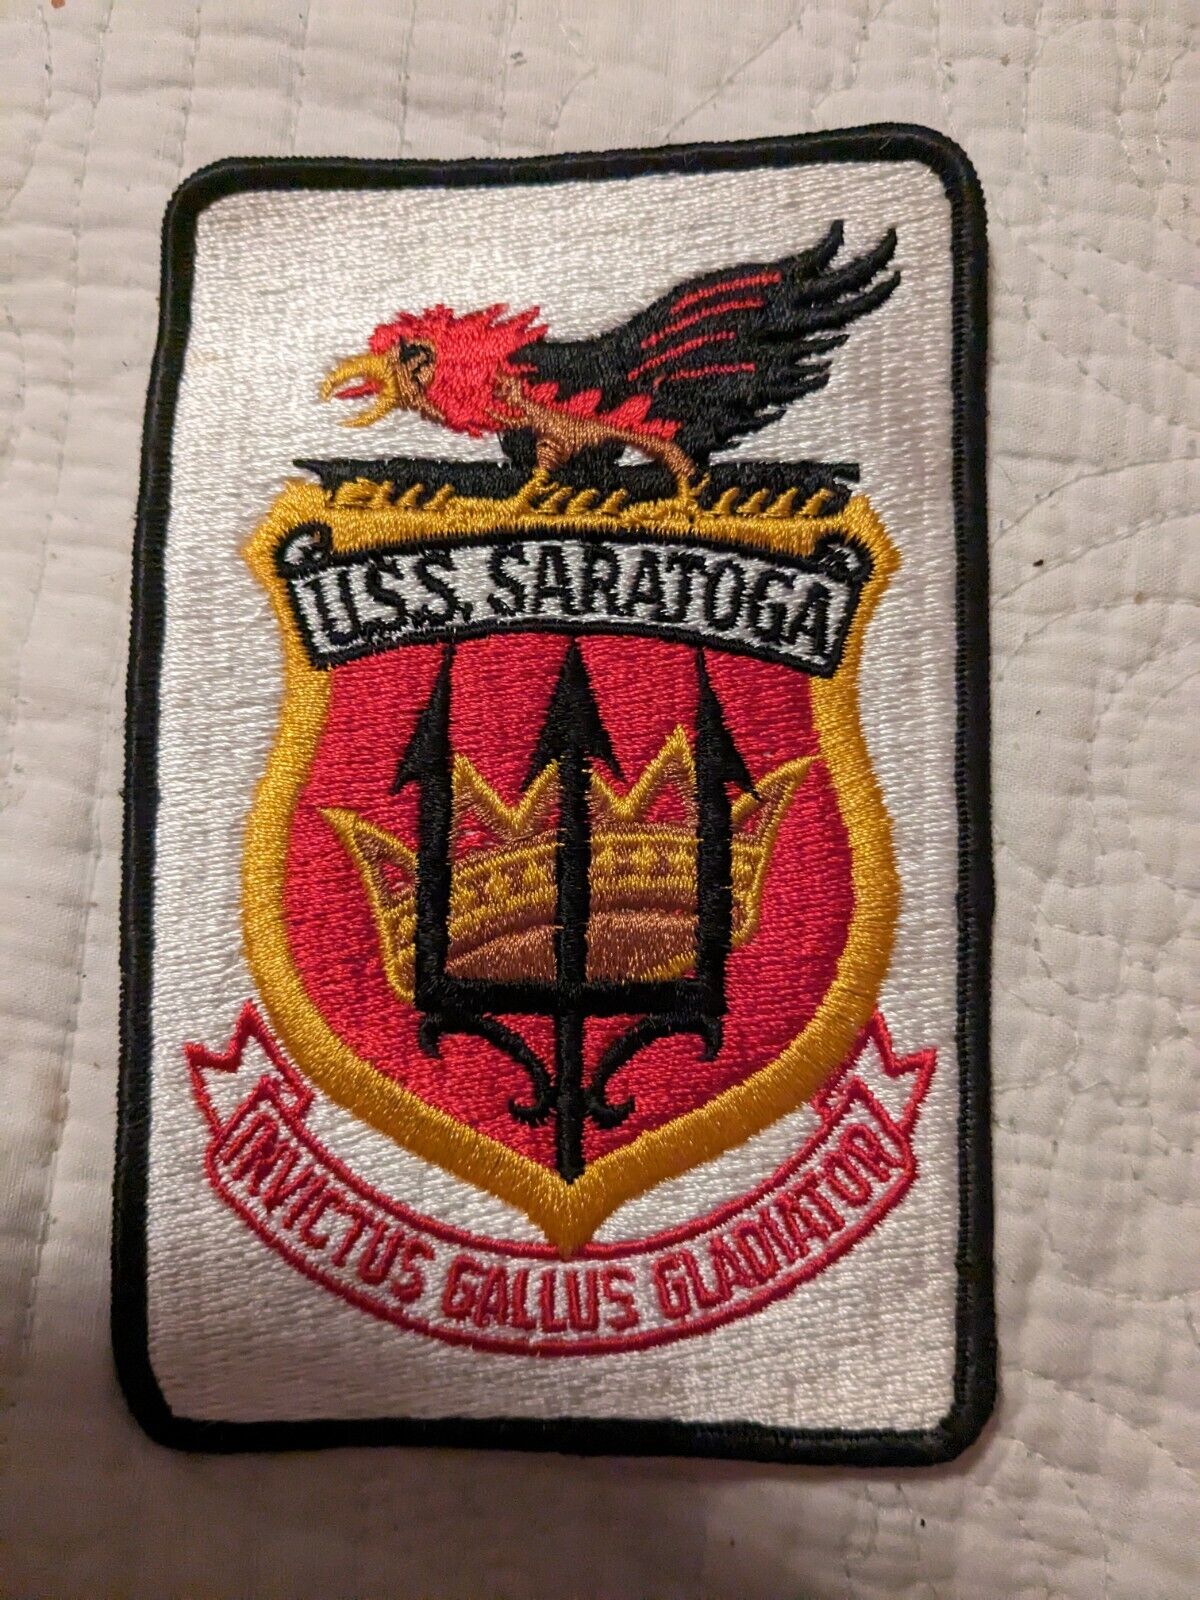 U.S.S. Saratoga Embroidered Patch 6 in x 4 in